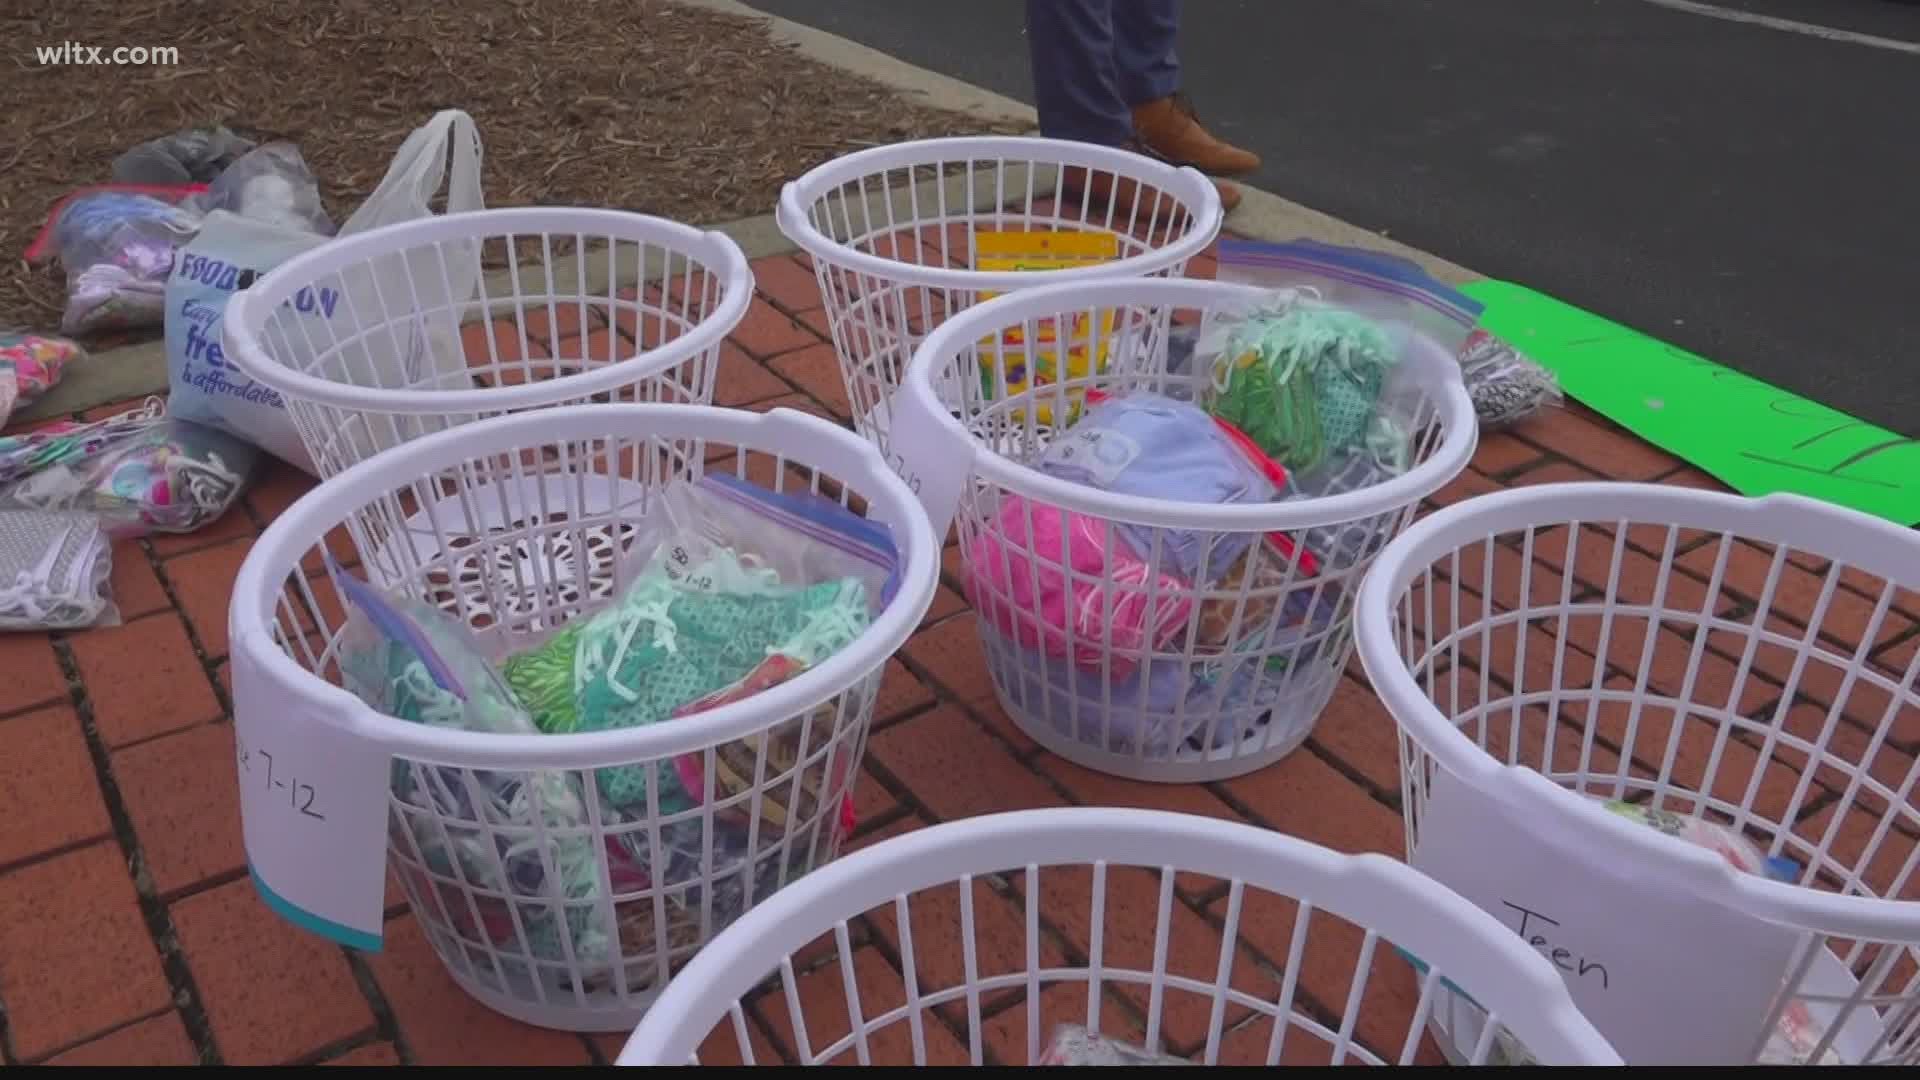 People dropped off masks they made at The Church of Jesus Christ of Latter-day Saints in West Columbia for local schools